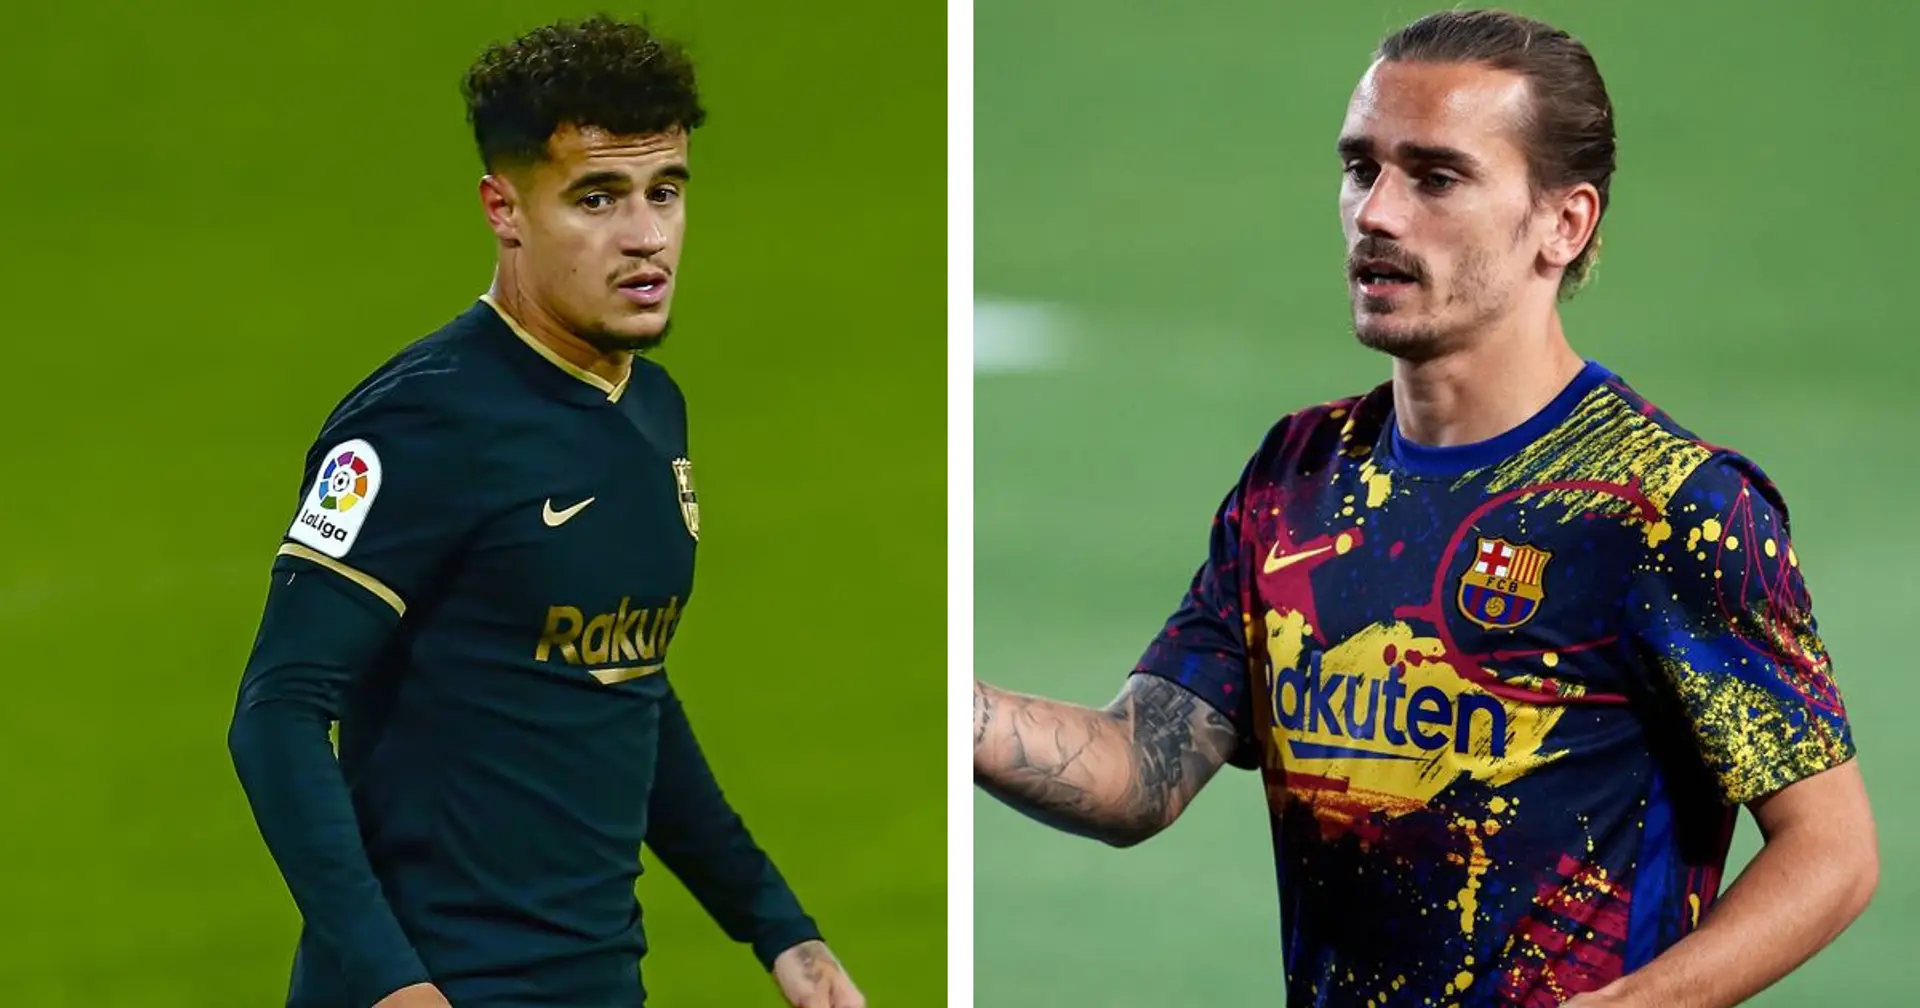 Barcelona have made up their mind to sell Griezmann and Coutinho this summer (reliability: 4 stars)